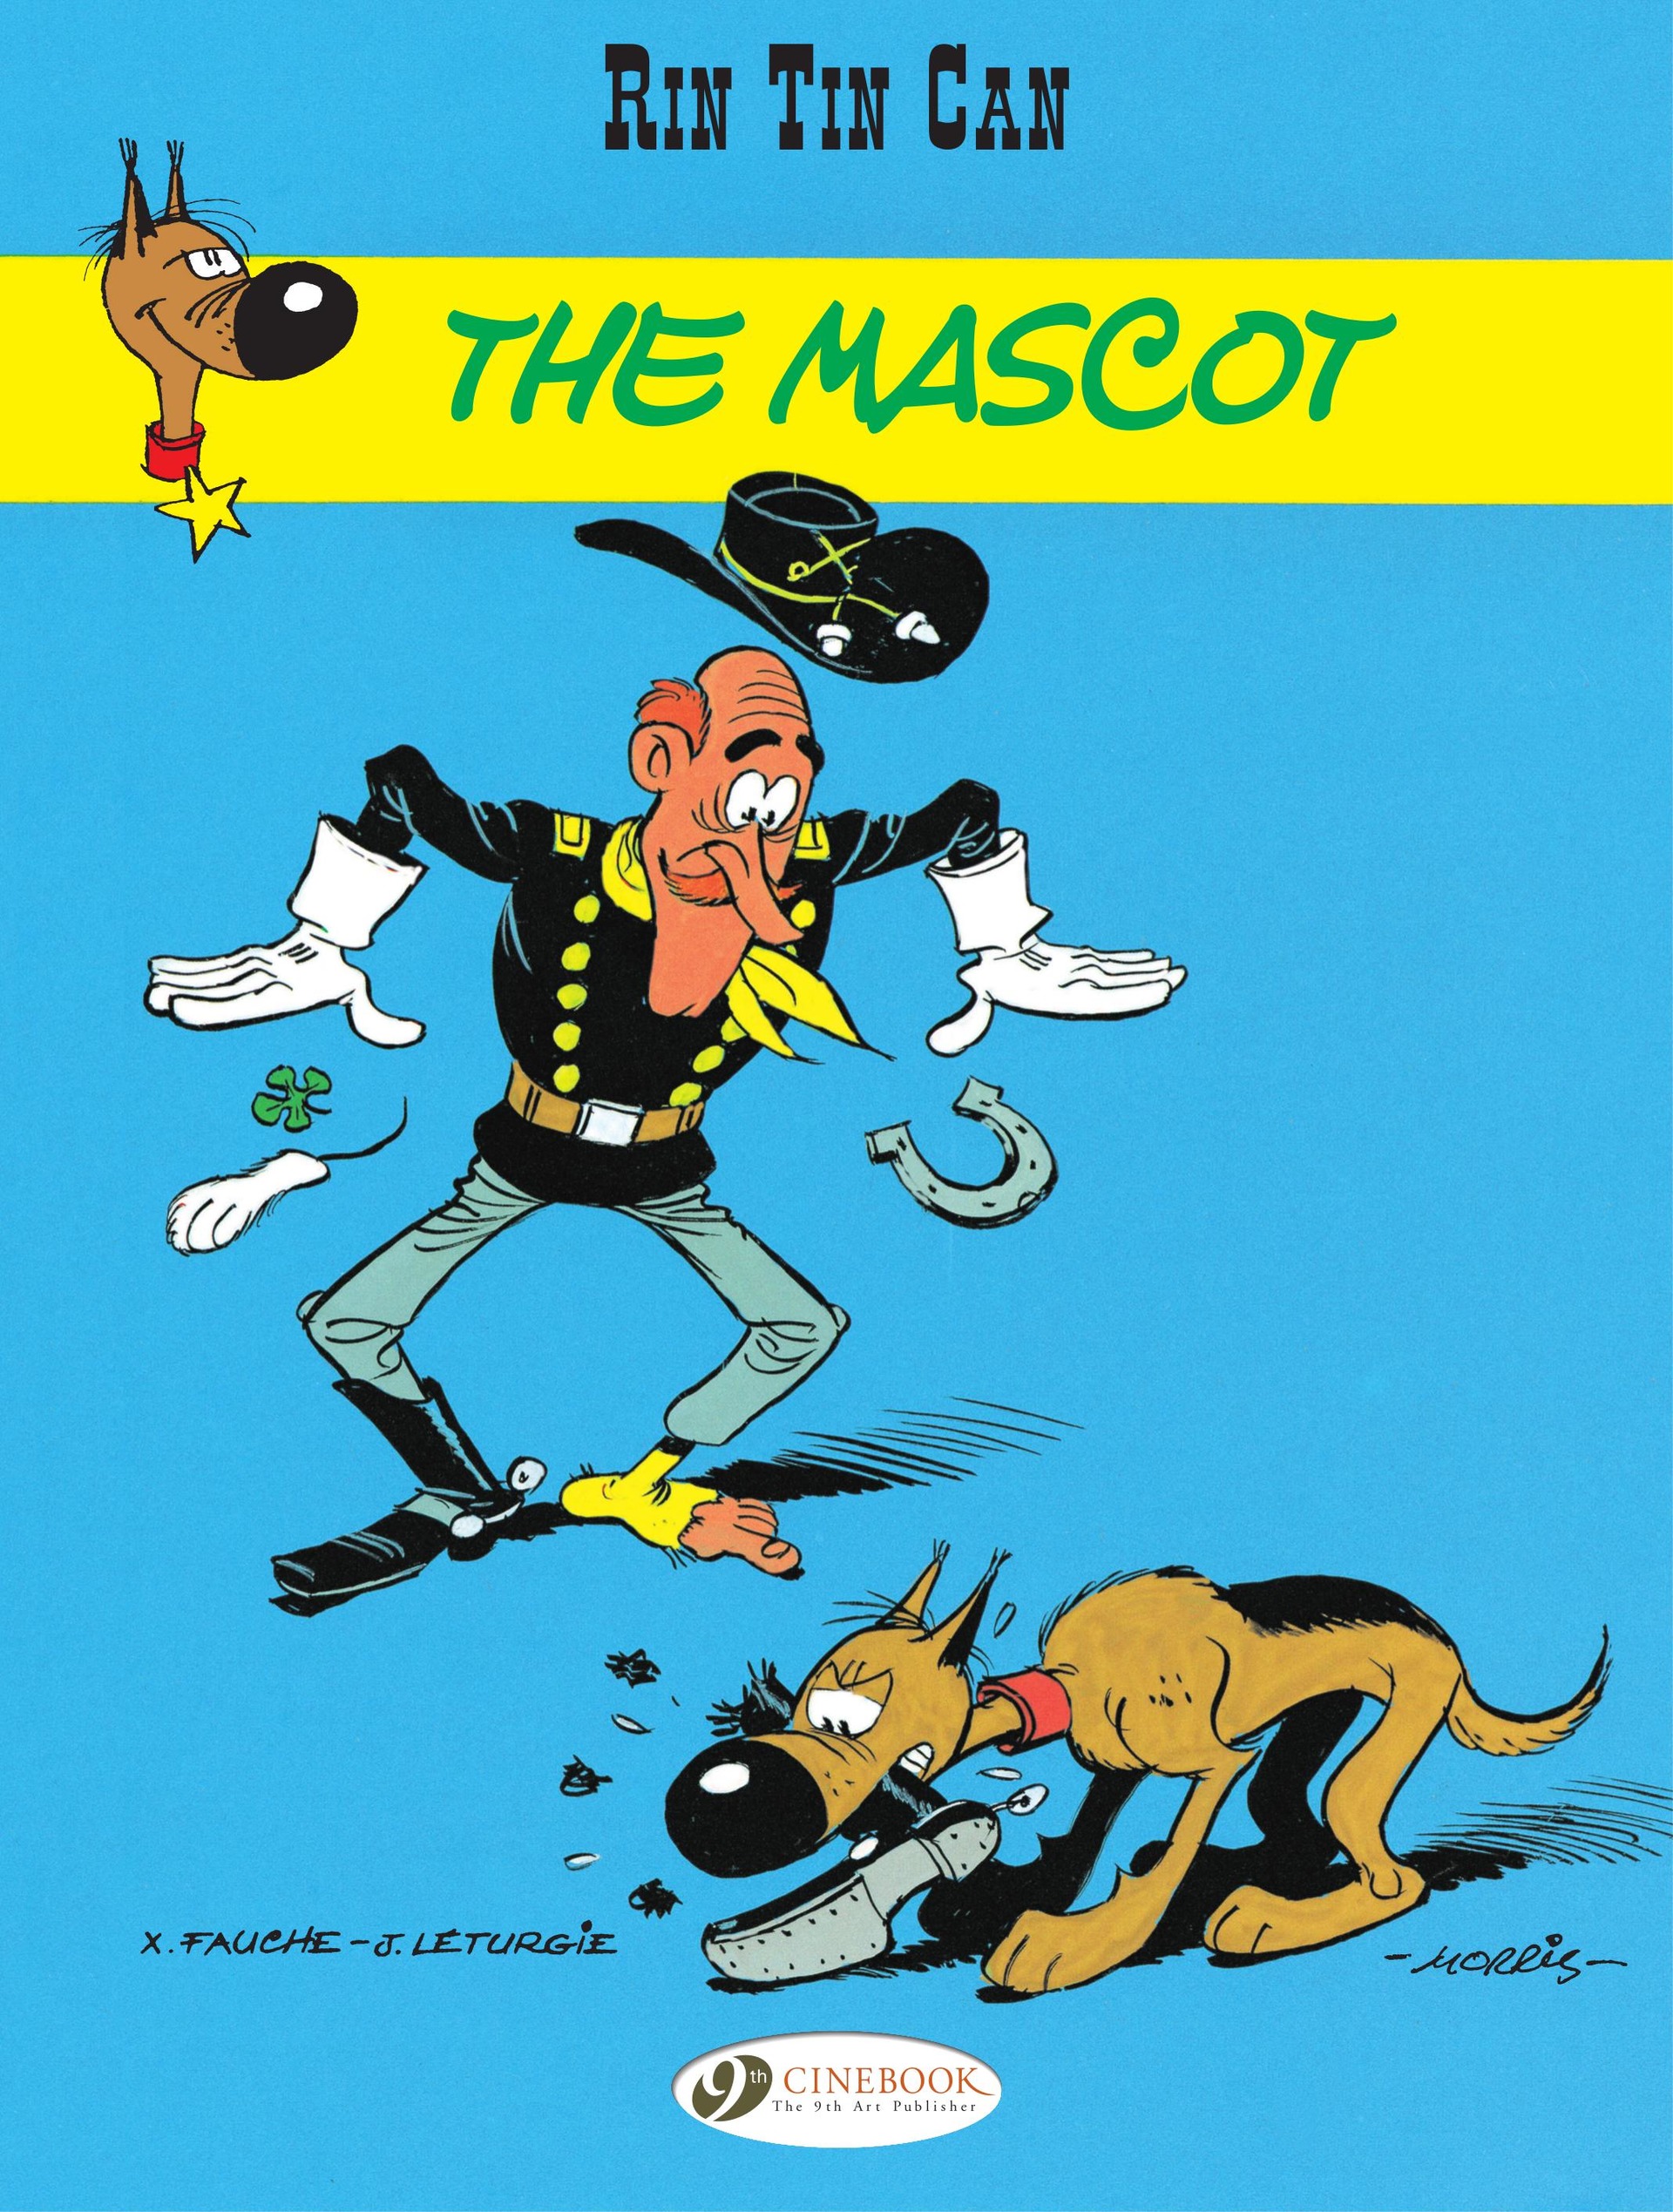 Read online Rin Tin Can: The Mascot comic -  Issue # Full - 1